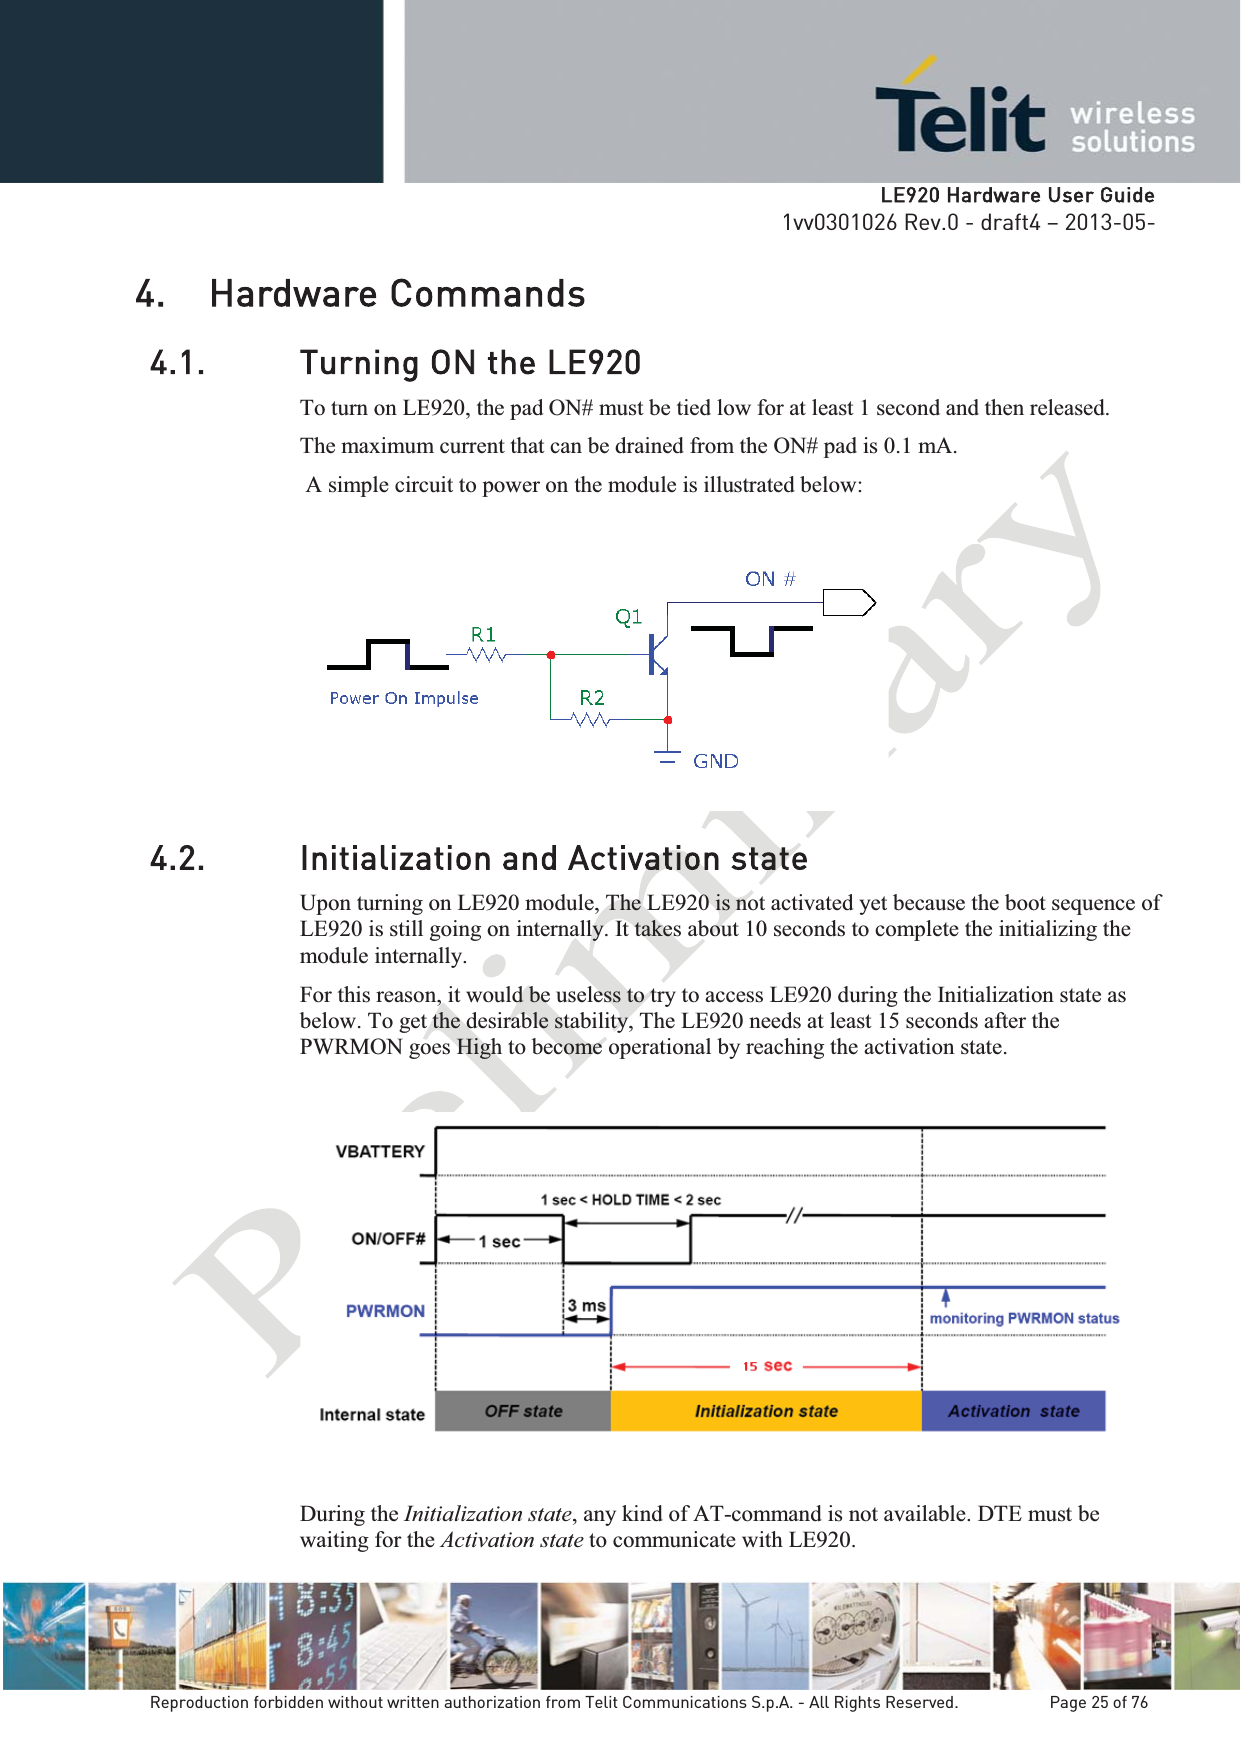   LLE920 Hardware User Guide1vv0301026 Rev.0 - draft4 – 2013-05-Reproduction forbidden without written authorization from Telit Communications S.p.A. - All Rights Reserved.    Page 25 of 76 4. Hardware Commands 4.1. Turning ON the LE920 To turn on LE920, the pad ON# must be tied low for at least 1 second and then released. The maximum current that can be drained from the ON# pad is 0.1 mA.  A simple circuit to power on the module is illustrated below:   4.2. Initialization and Activation state Upon turning on LE920 module, The LE920 is not activated yet because the boot sequence of LE920 is still going on internally. It takes about 10 seconds to complete the initializing the module internally. For this reason, it would be useless to try to access LE920 during the Initialization state as below. To get the desirable stability, The LE920 needs at least 15 seconds after the PWRMON goes High to become operational by reaching the activation state.    During the Initialization state, any kind of AT-command is not available. DTE must be waiting for the Activation state to communicate with LE920. 